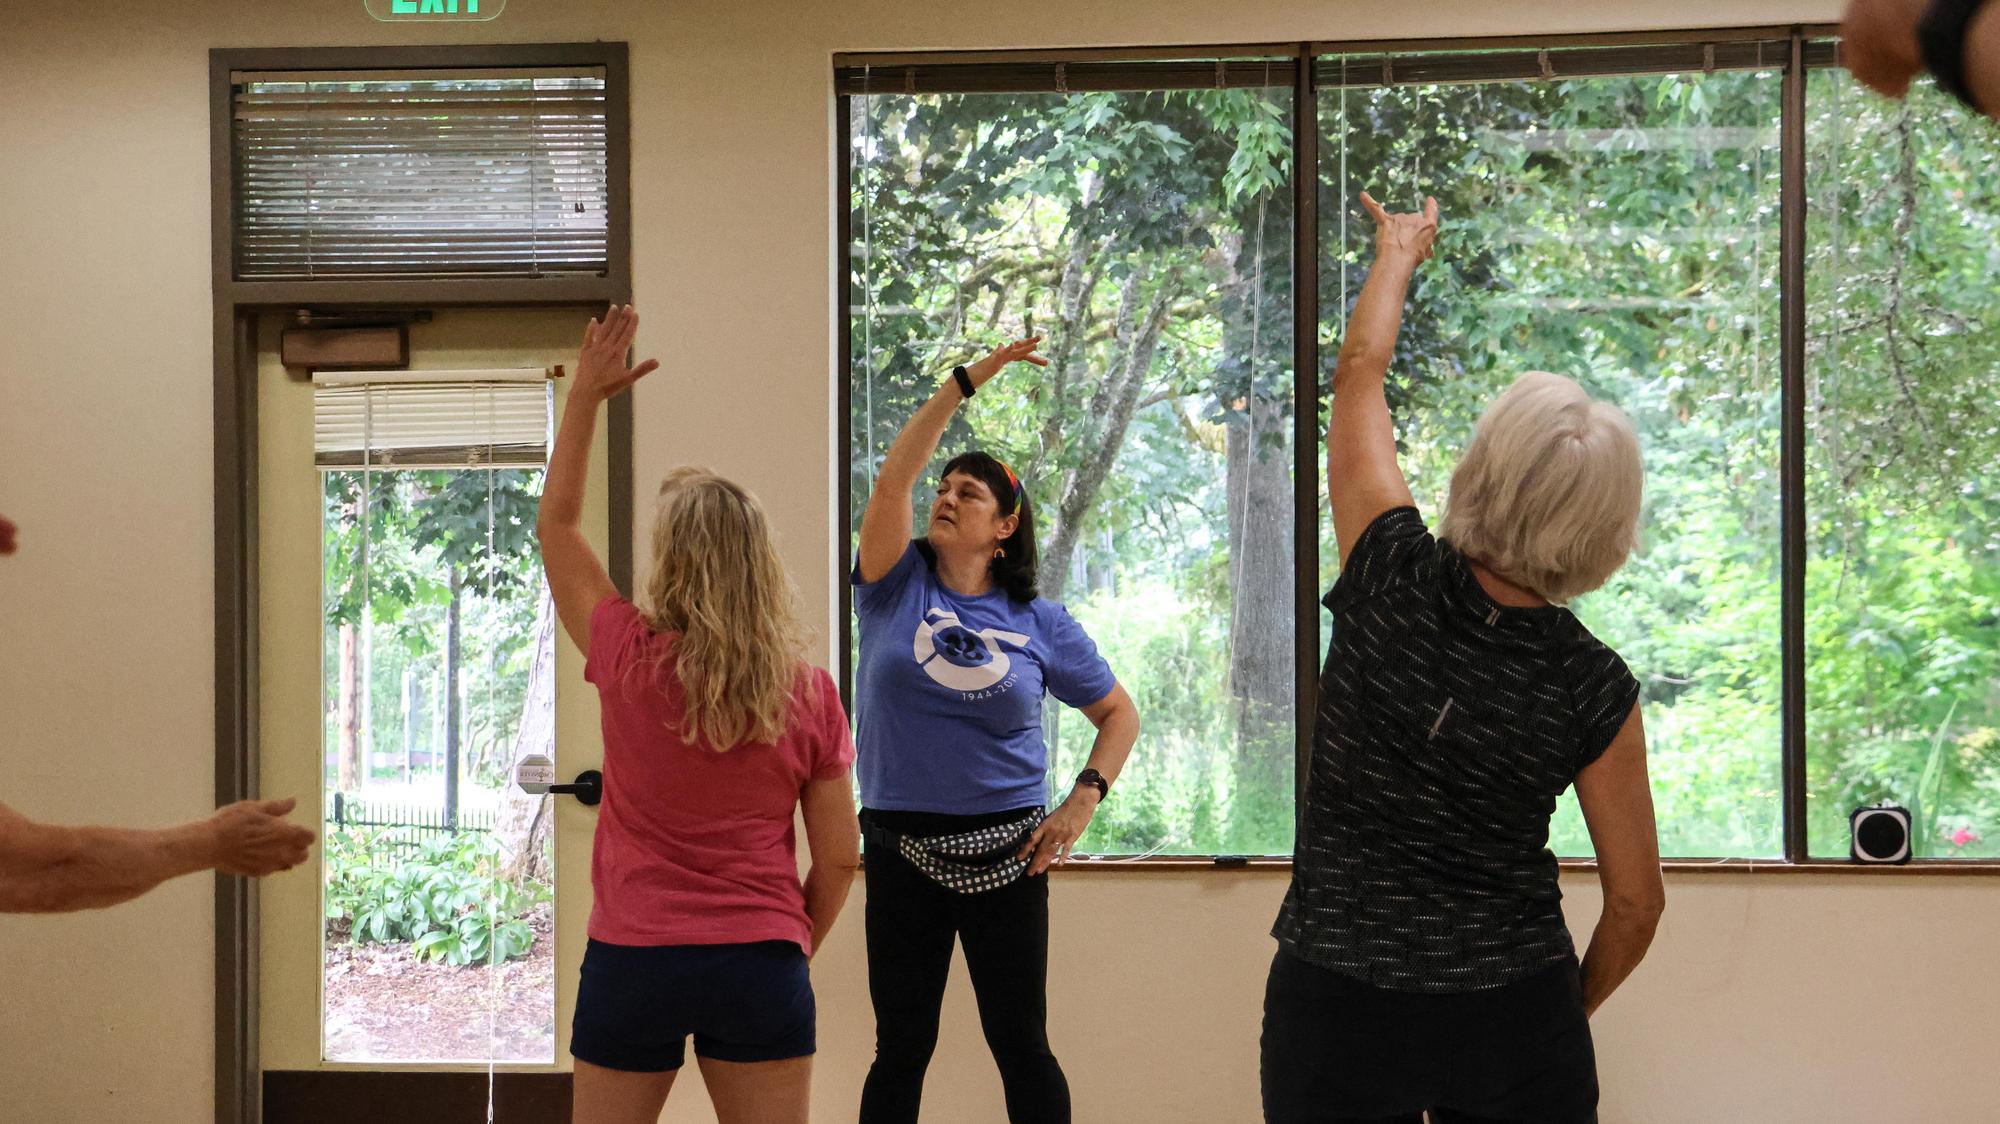 Participants in a fitness class stretch